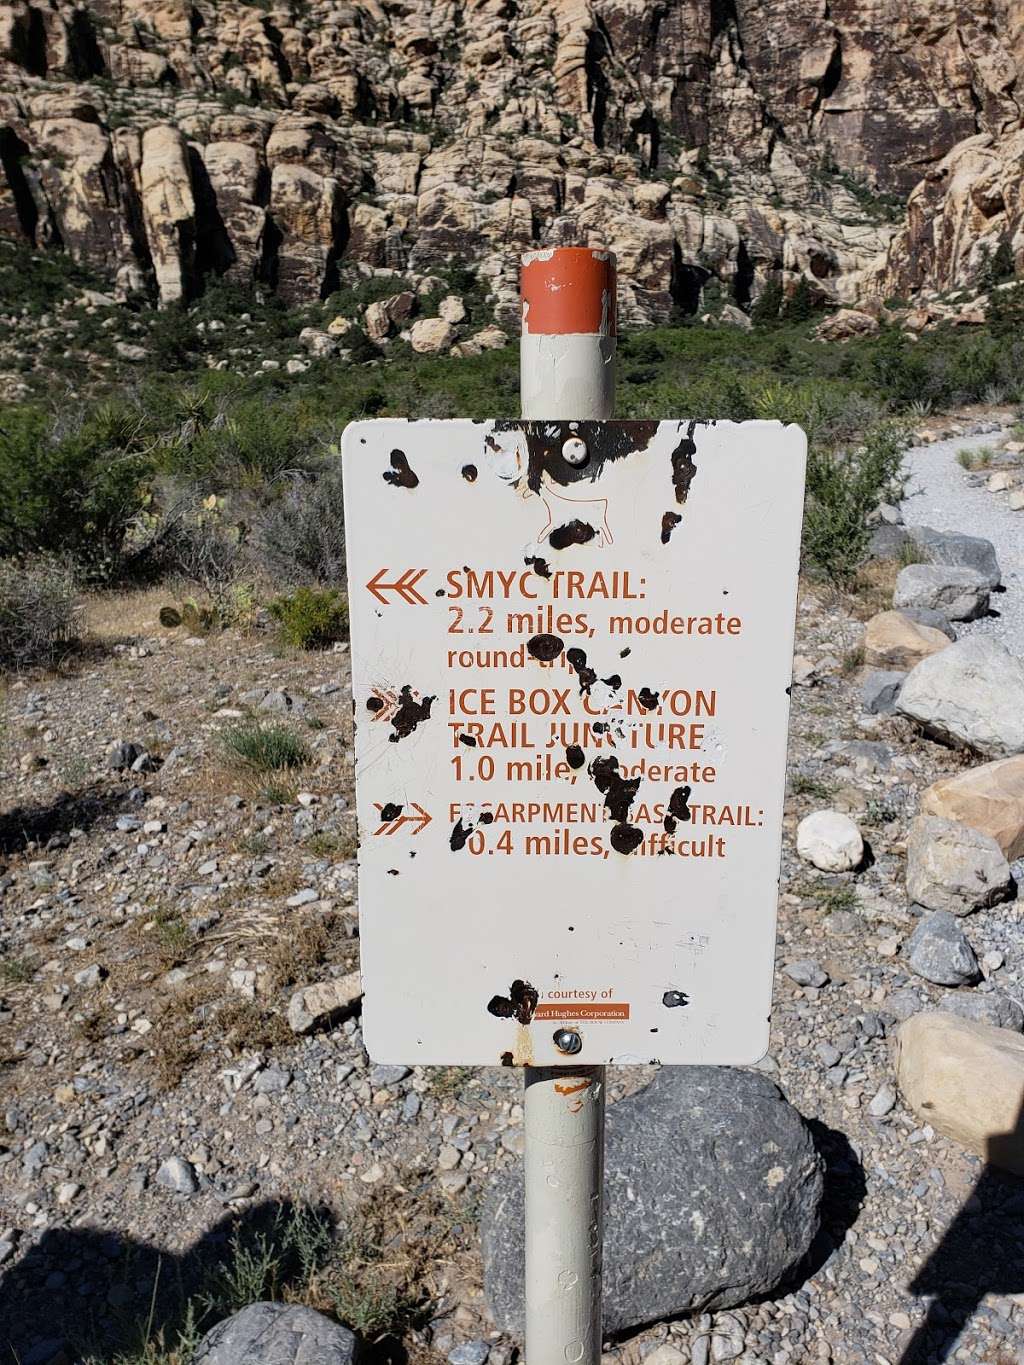 Spring Mountain Youth Camp Trail | Scenic Loop Dr, Las Vegas, NV 89161